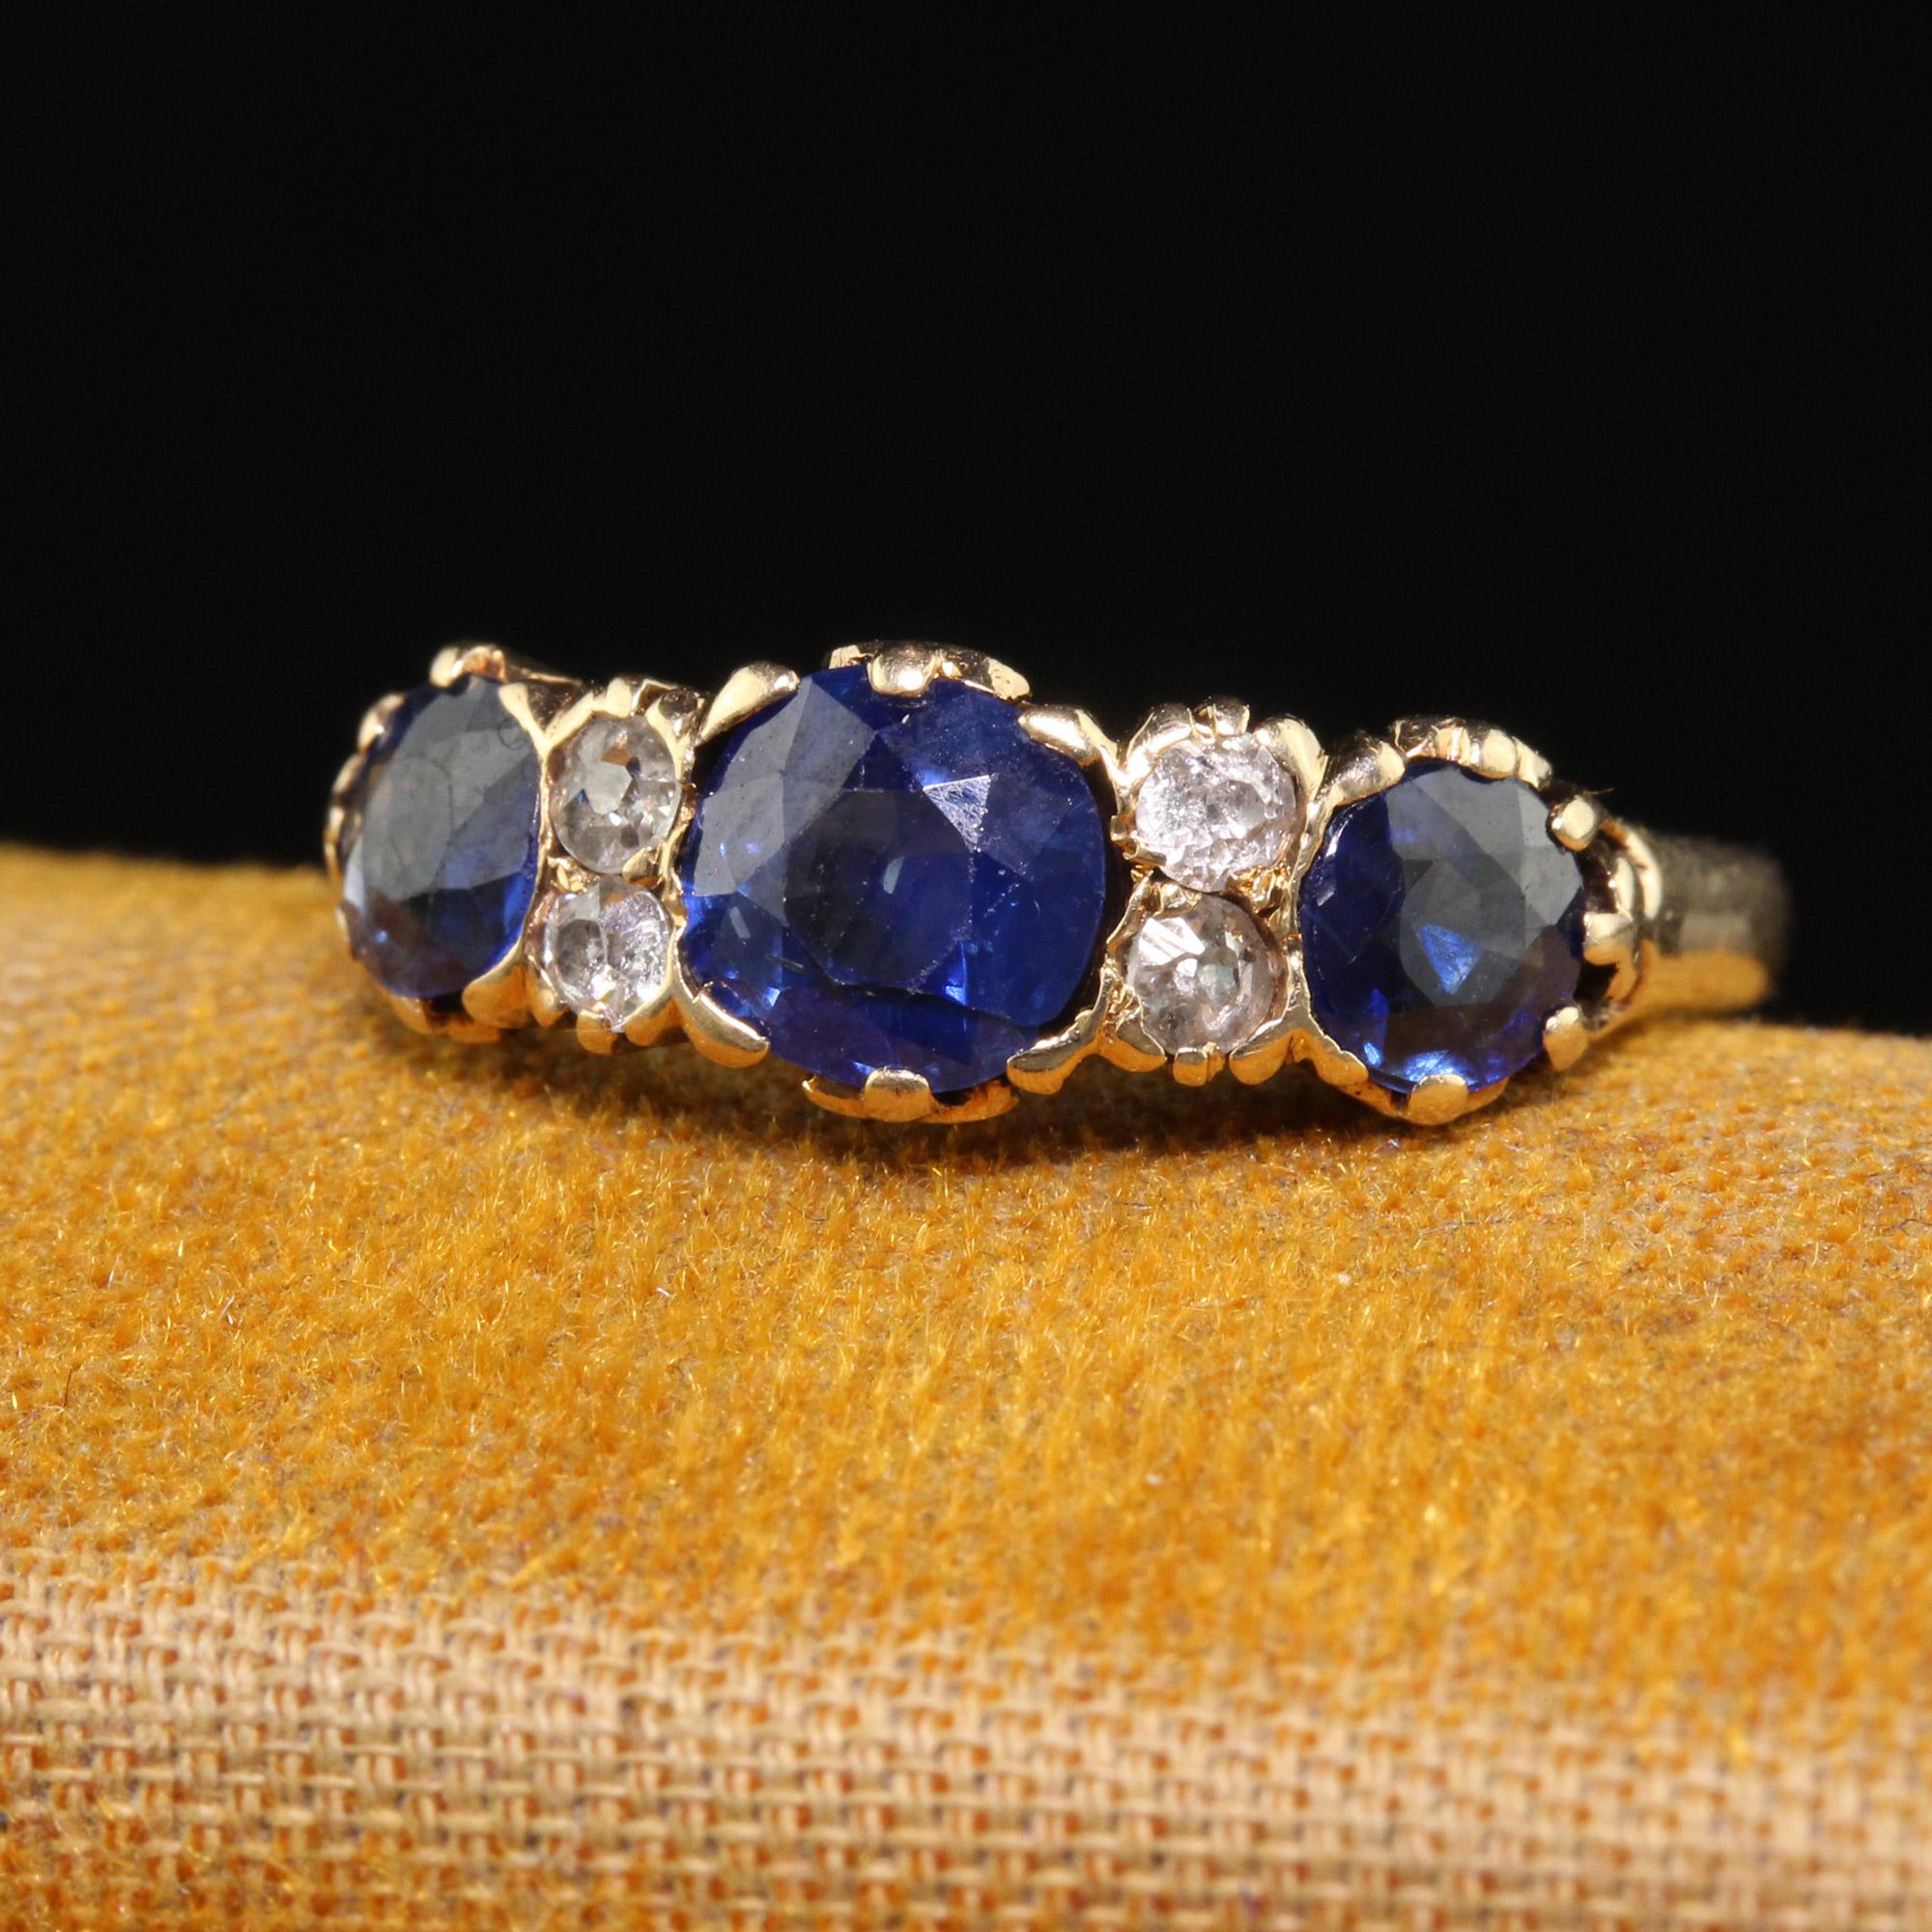 Beautiful Antique Victorian 14K Yellow Gold Natural Sapphire and Diamond Three Stone Band - Size 4 3/4. This gorgeous Victorian three stone band is crafted in 14k yellow gold. The top of the ring has three old cut sapphires that are a beautiful hue